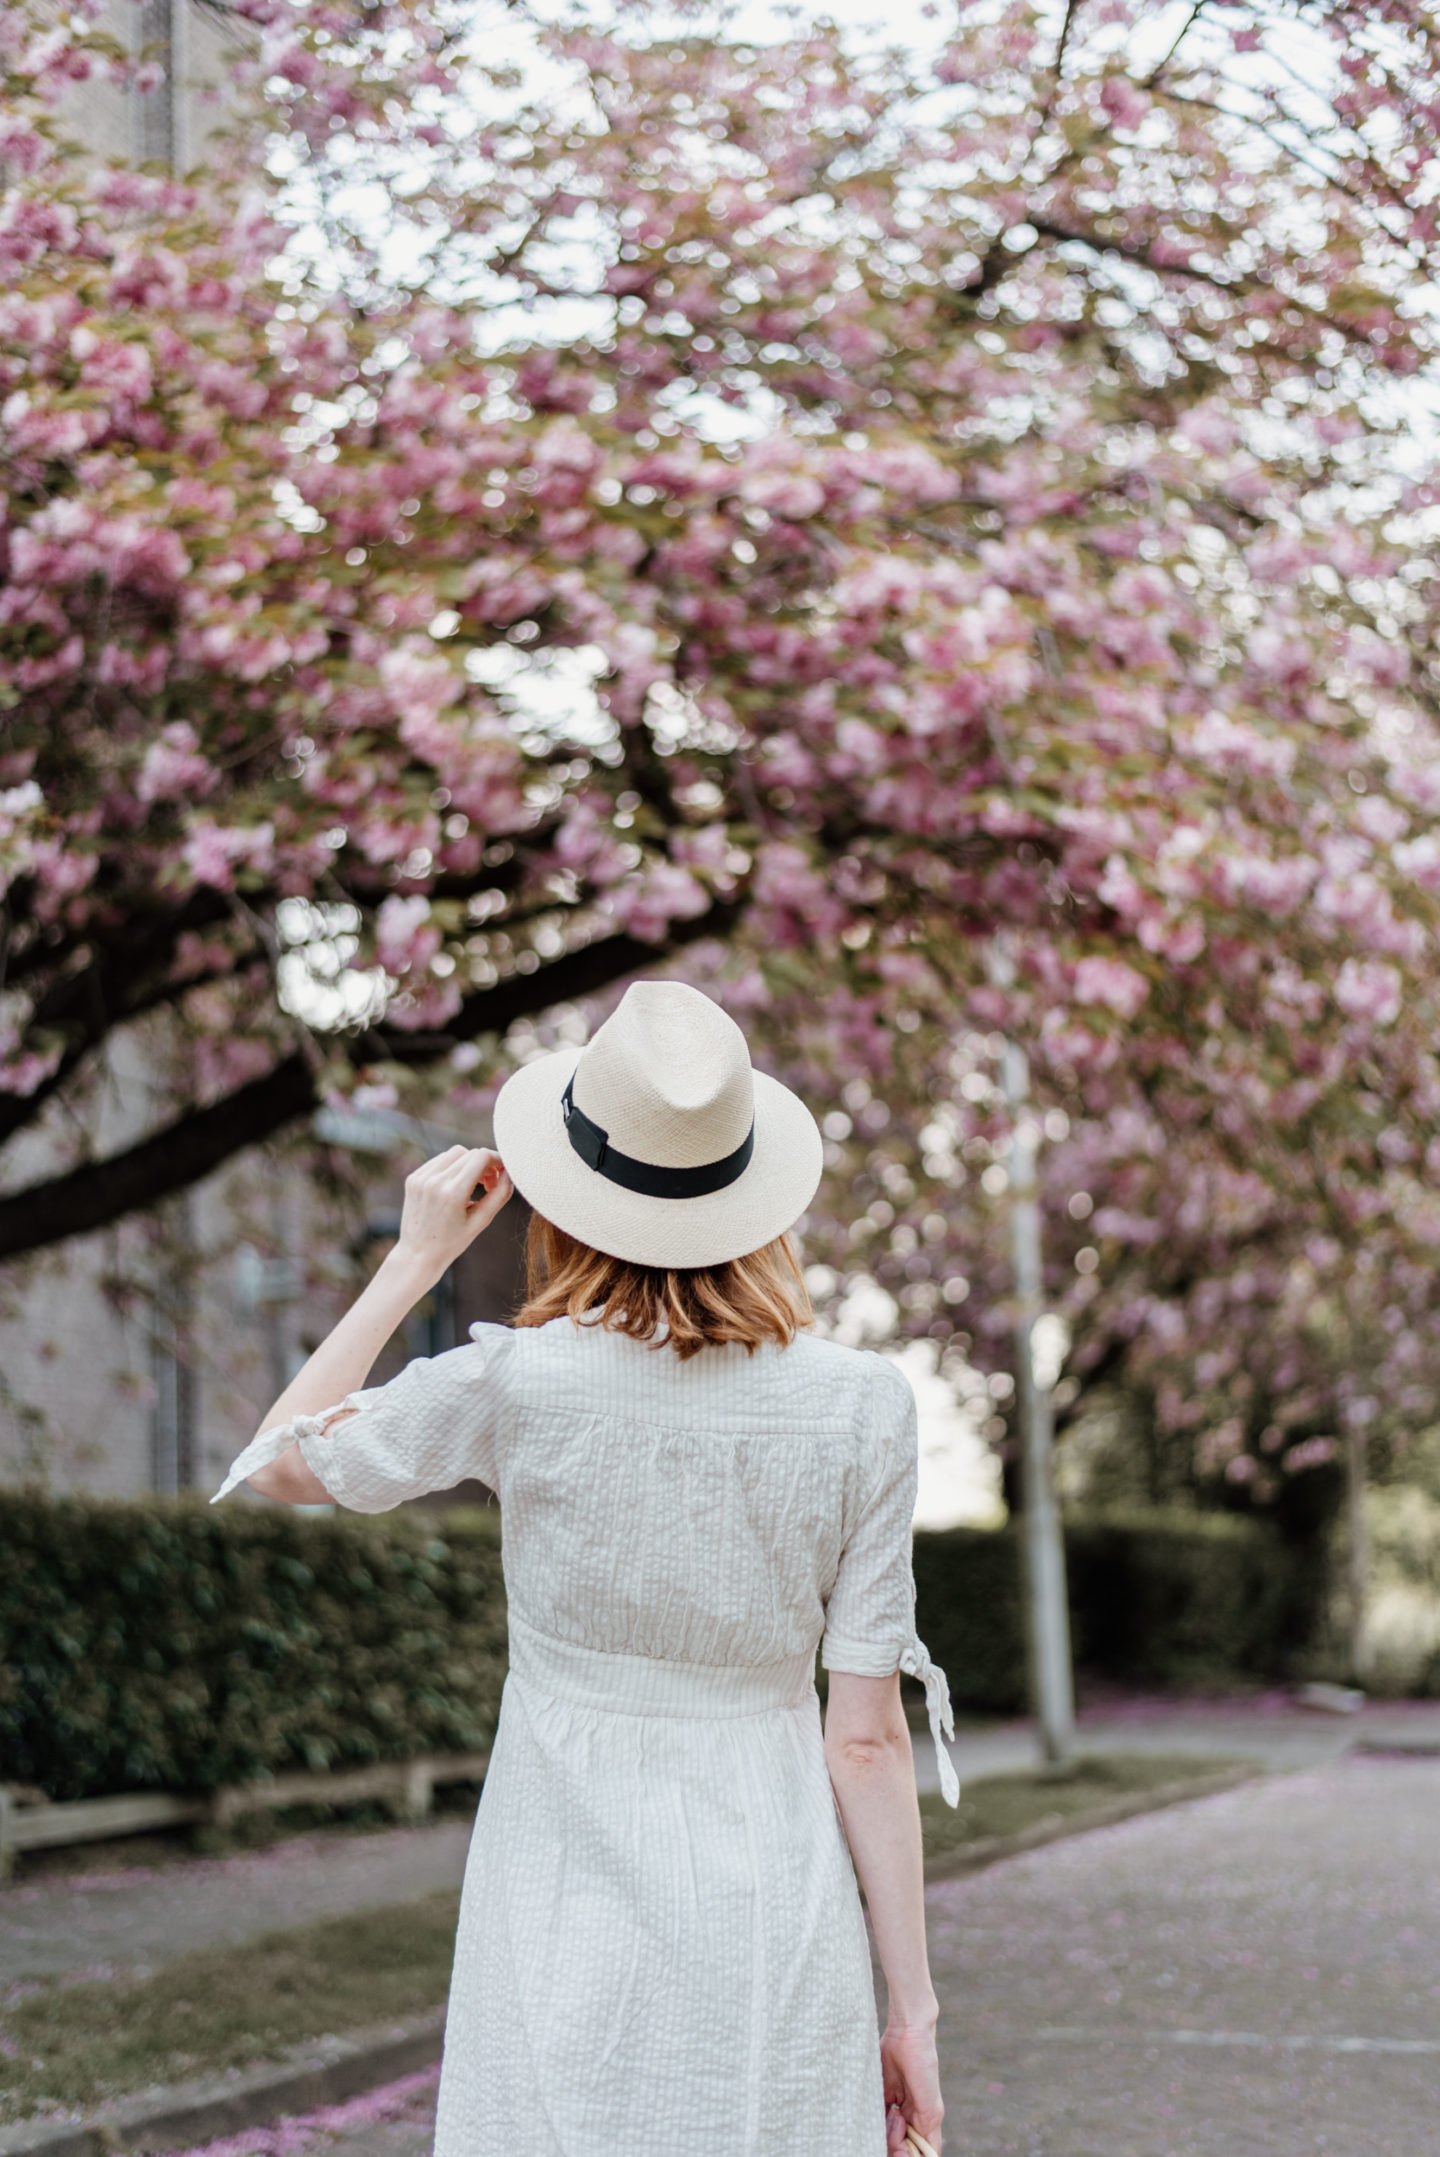 Girl in white dress with a hat looking at cherry blossoms